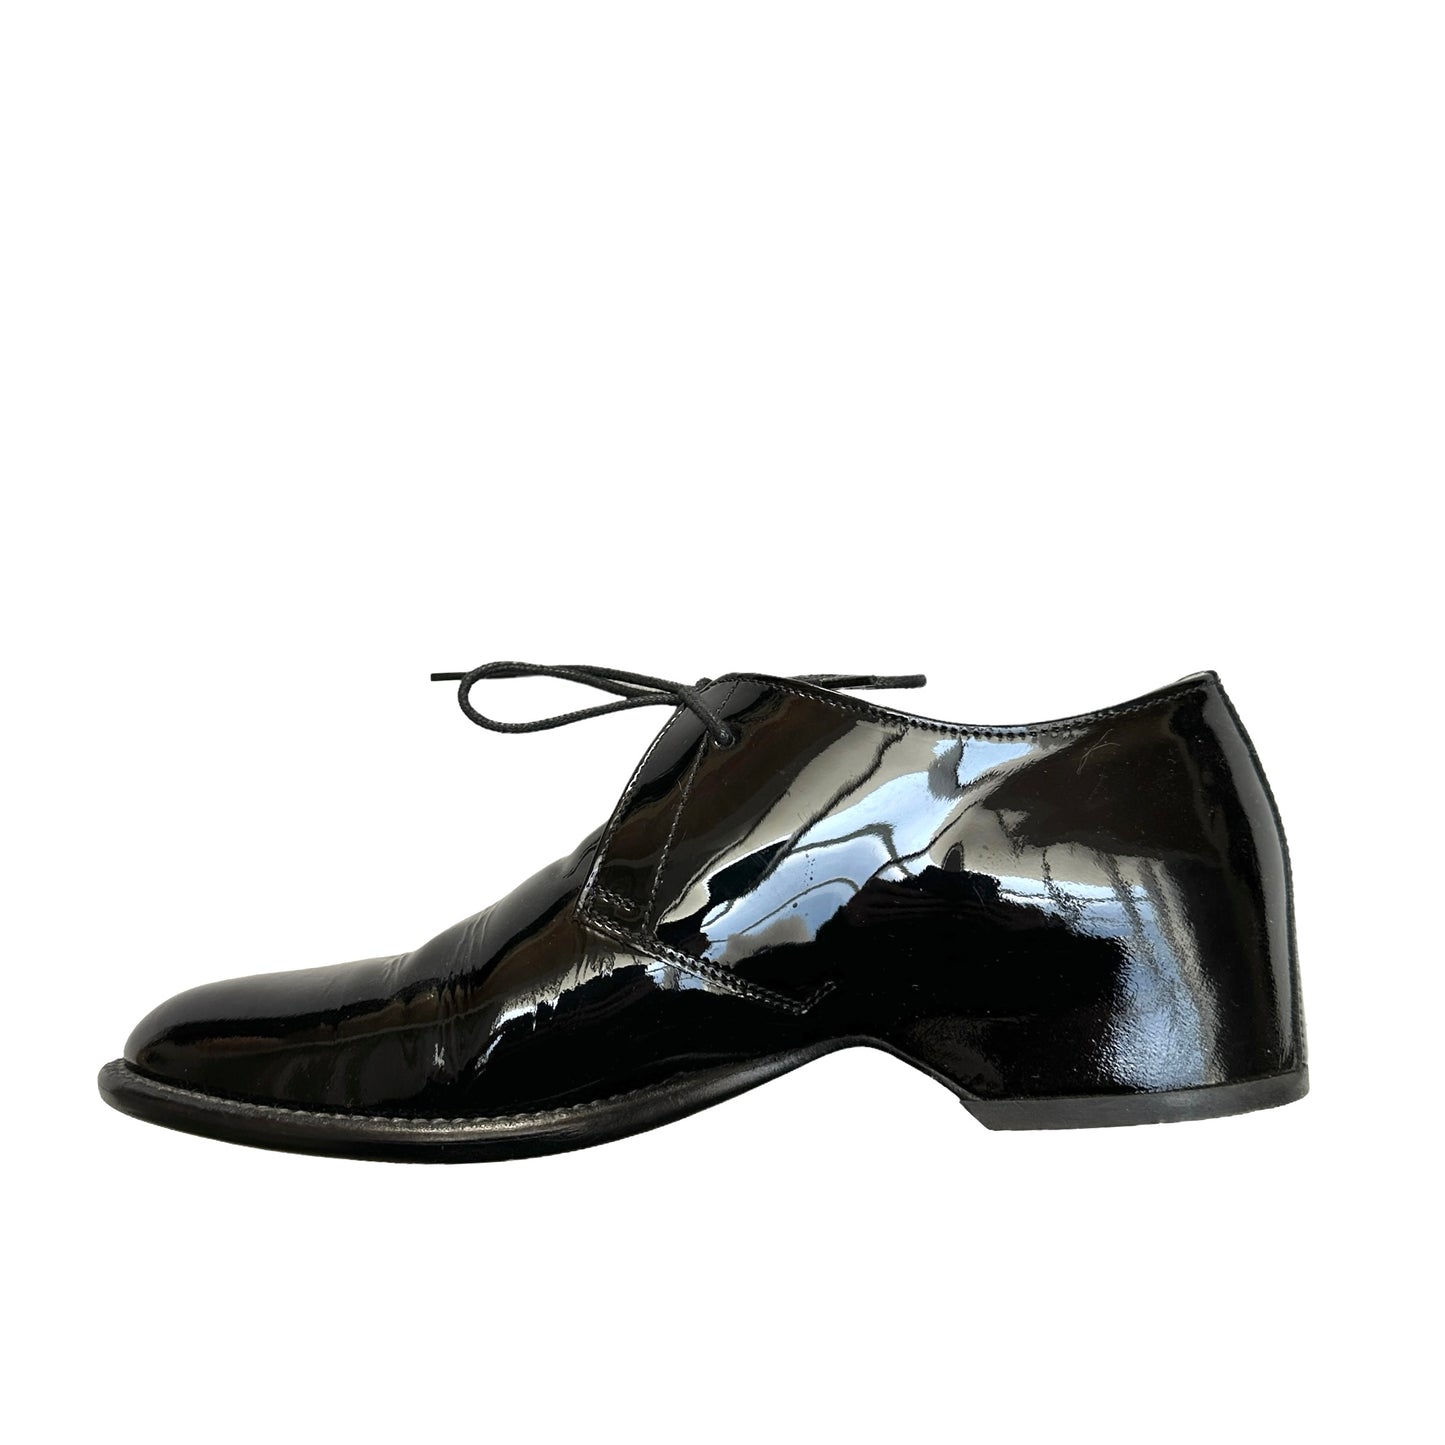 Black Patent Loafers - 5